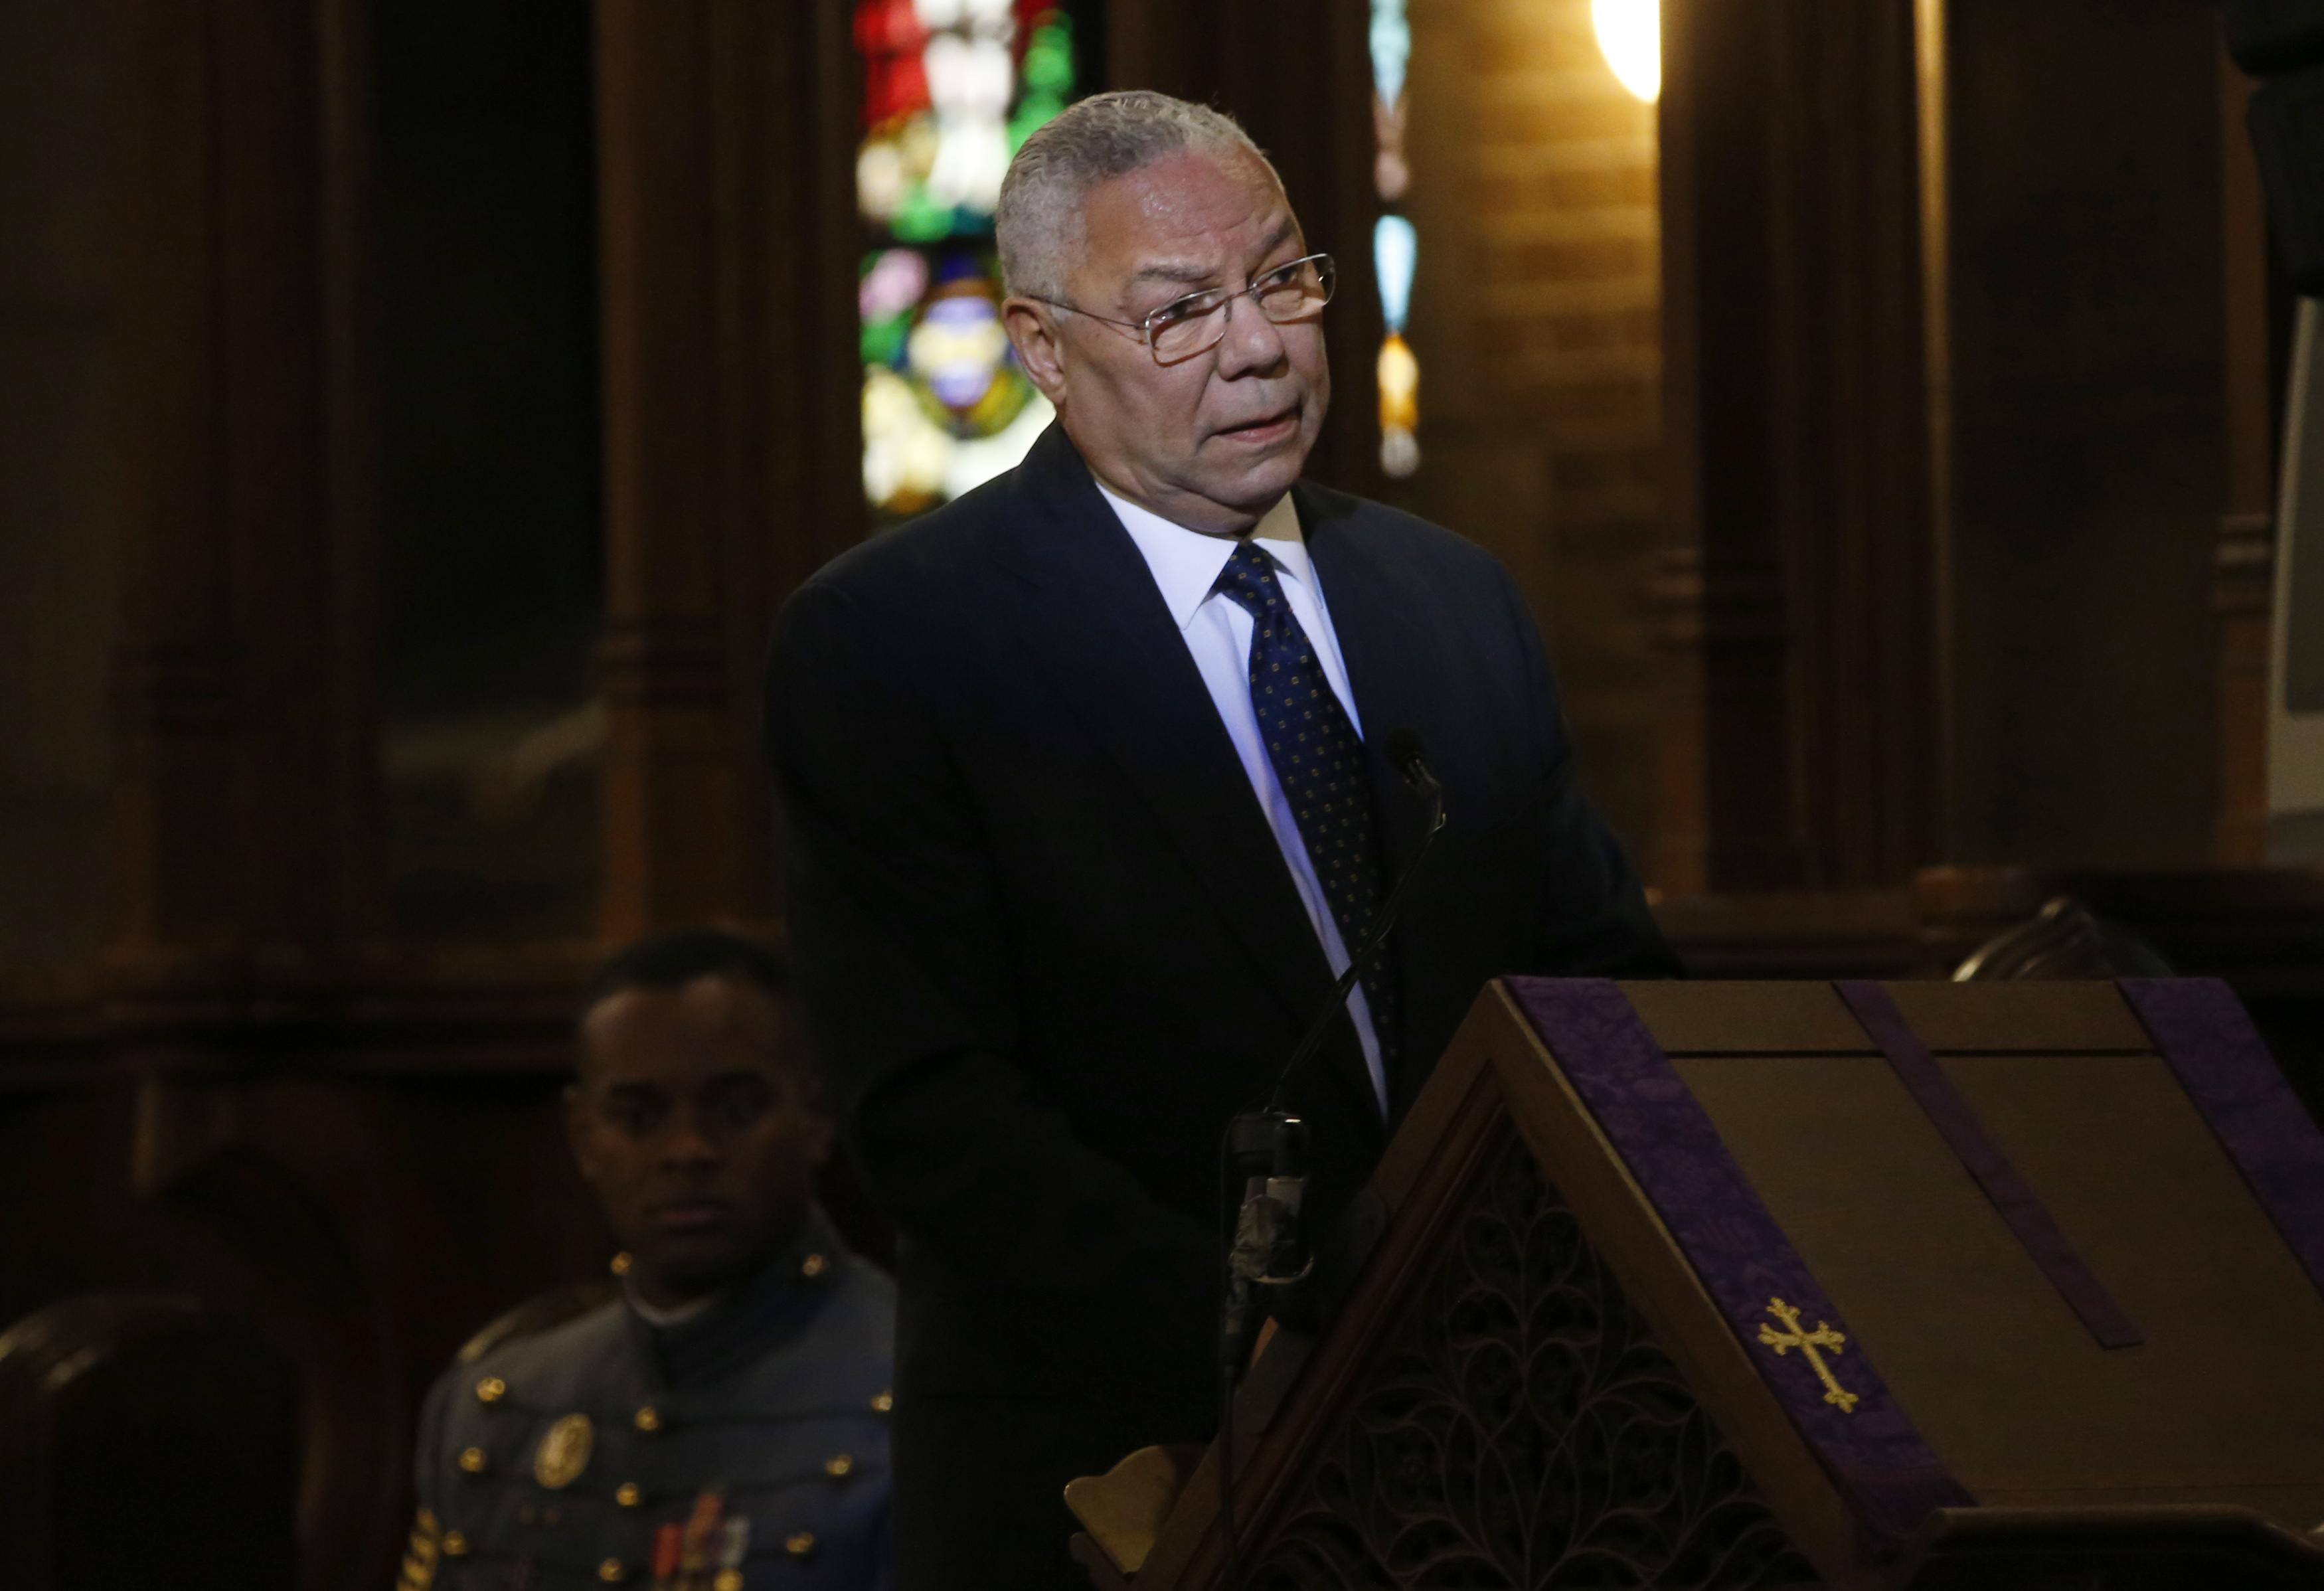 Former U.S. Army Four Star General and former U.S. Secretary of State Colin Powell speaks at the funeral for the late U.S. Army Four Star General H. Norman Schwarzkopf at the Cadet Chapel at the United States Military Academy at West Point, New York, February 28, 2013. REUTERS/Mike Segar 